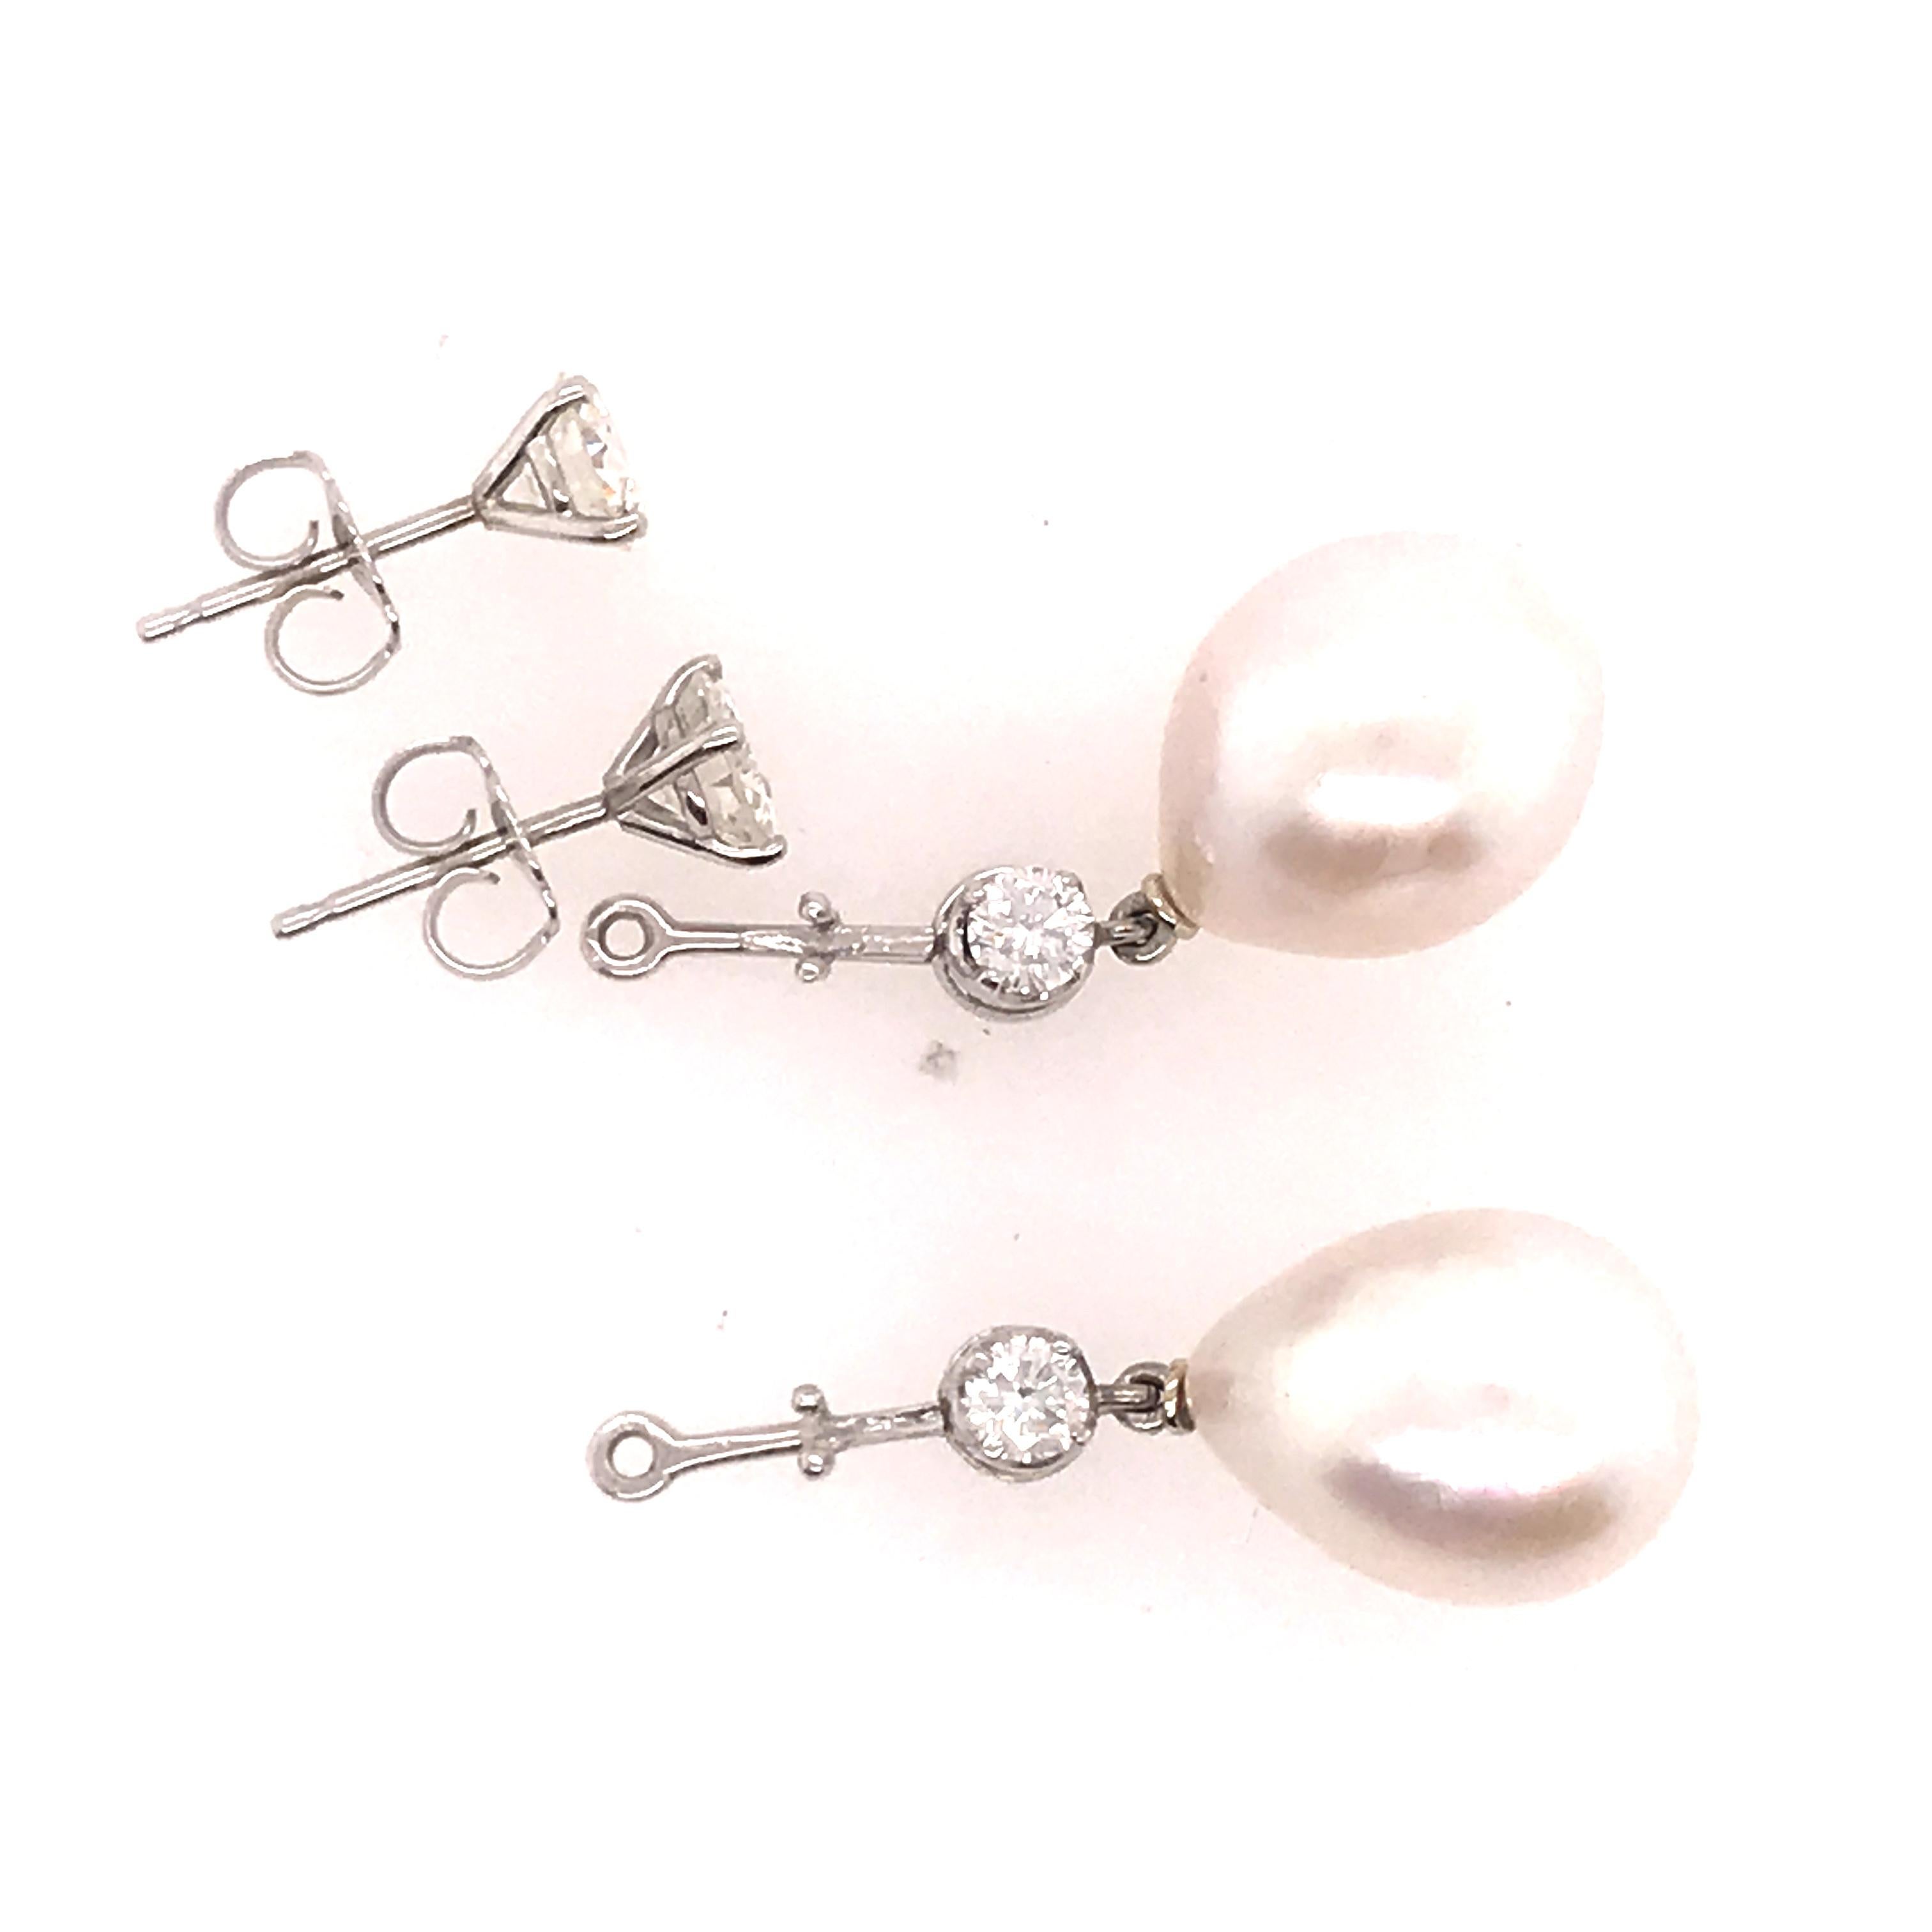 Teardrop Pearl and Diamond Earring in 18K White Gold.  A pair of Diamond Studs with a removable Diamond and Teardrop Pear dangle.  The (4) Round Brilliant Cut Diamonds weigh 1.18 carat total weight are I-J in color and VS1 in clarity.  The earrings